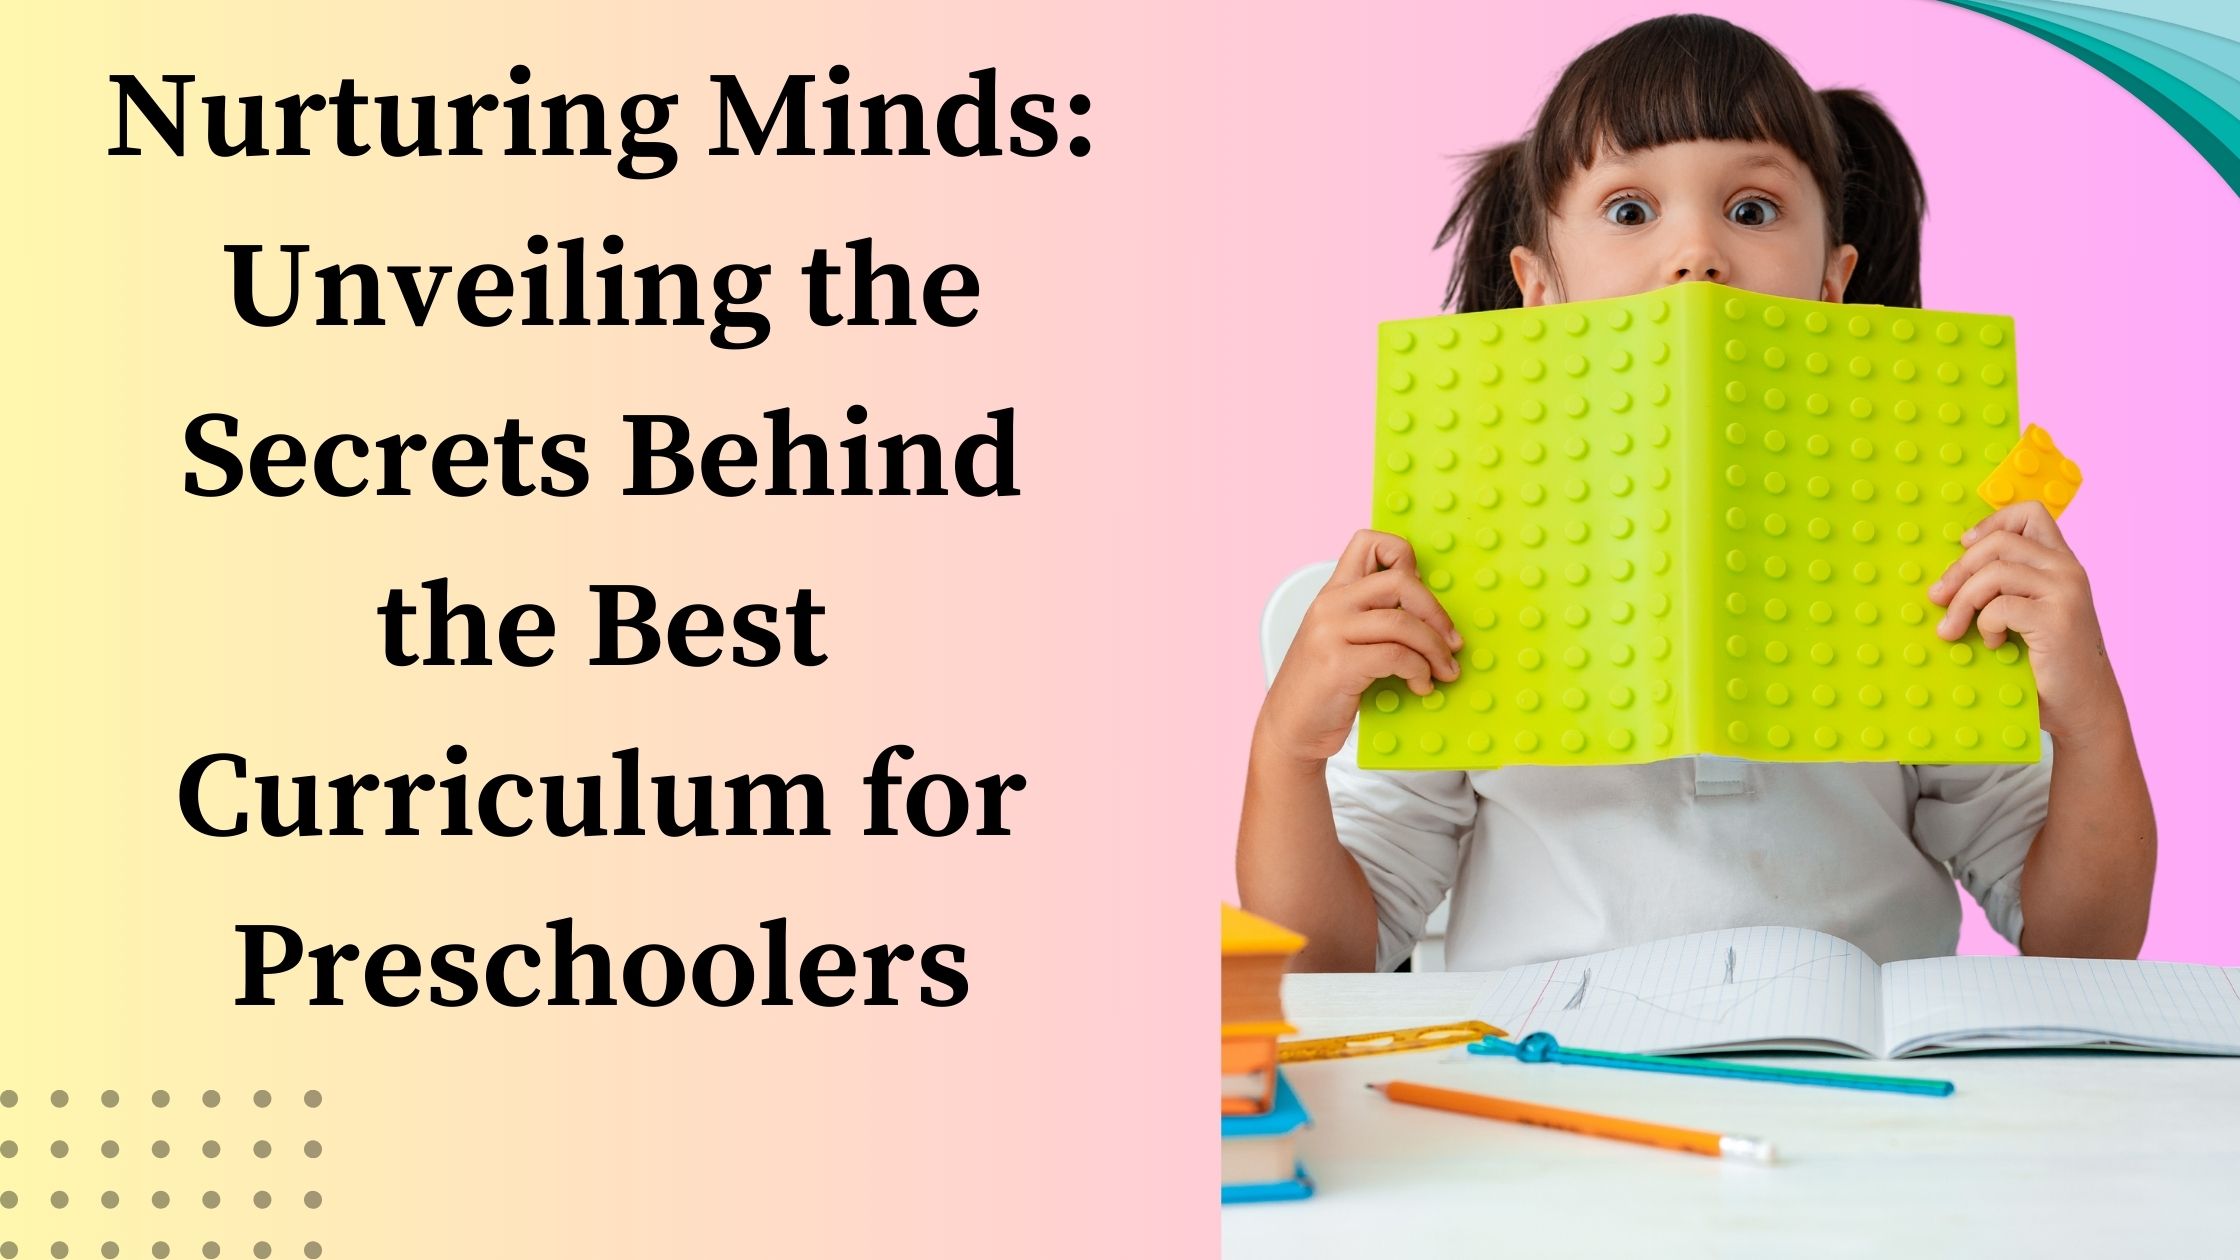 Nurturing Minds: Unveiling the Secrets Behind the Best Curriculum for Preschoolers